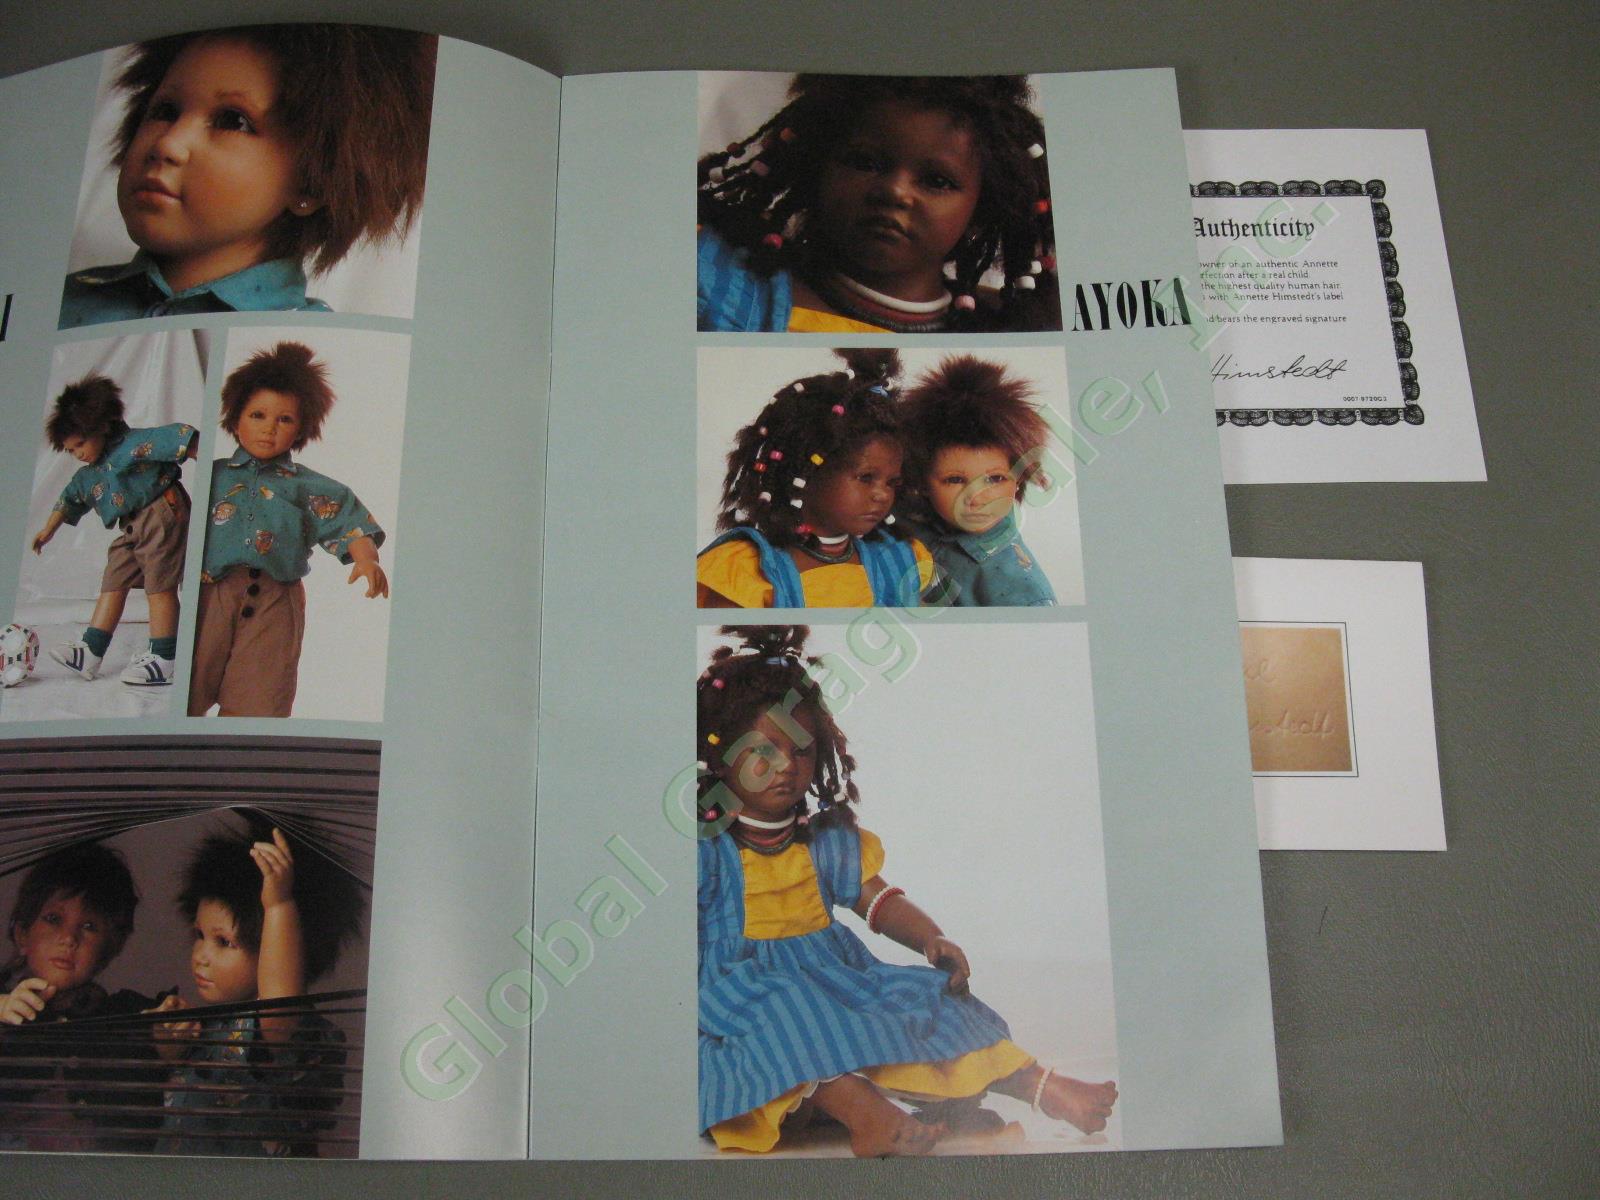 Annette Himstedt 26" Ayoka African Girl Doll 4848 Signed! Orig Box COA Exc Cond! 13